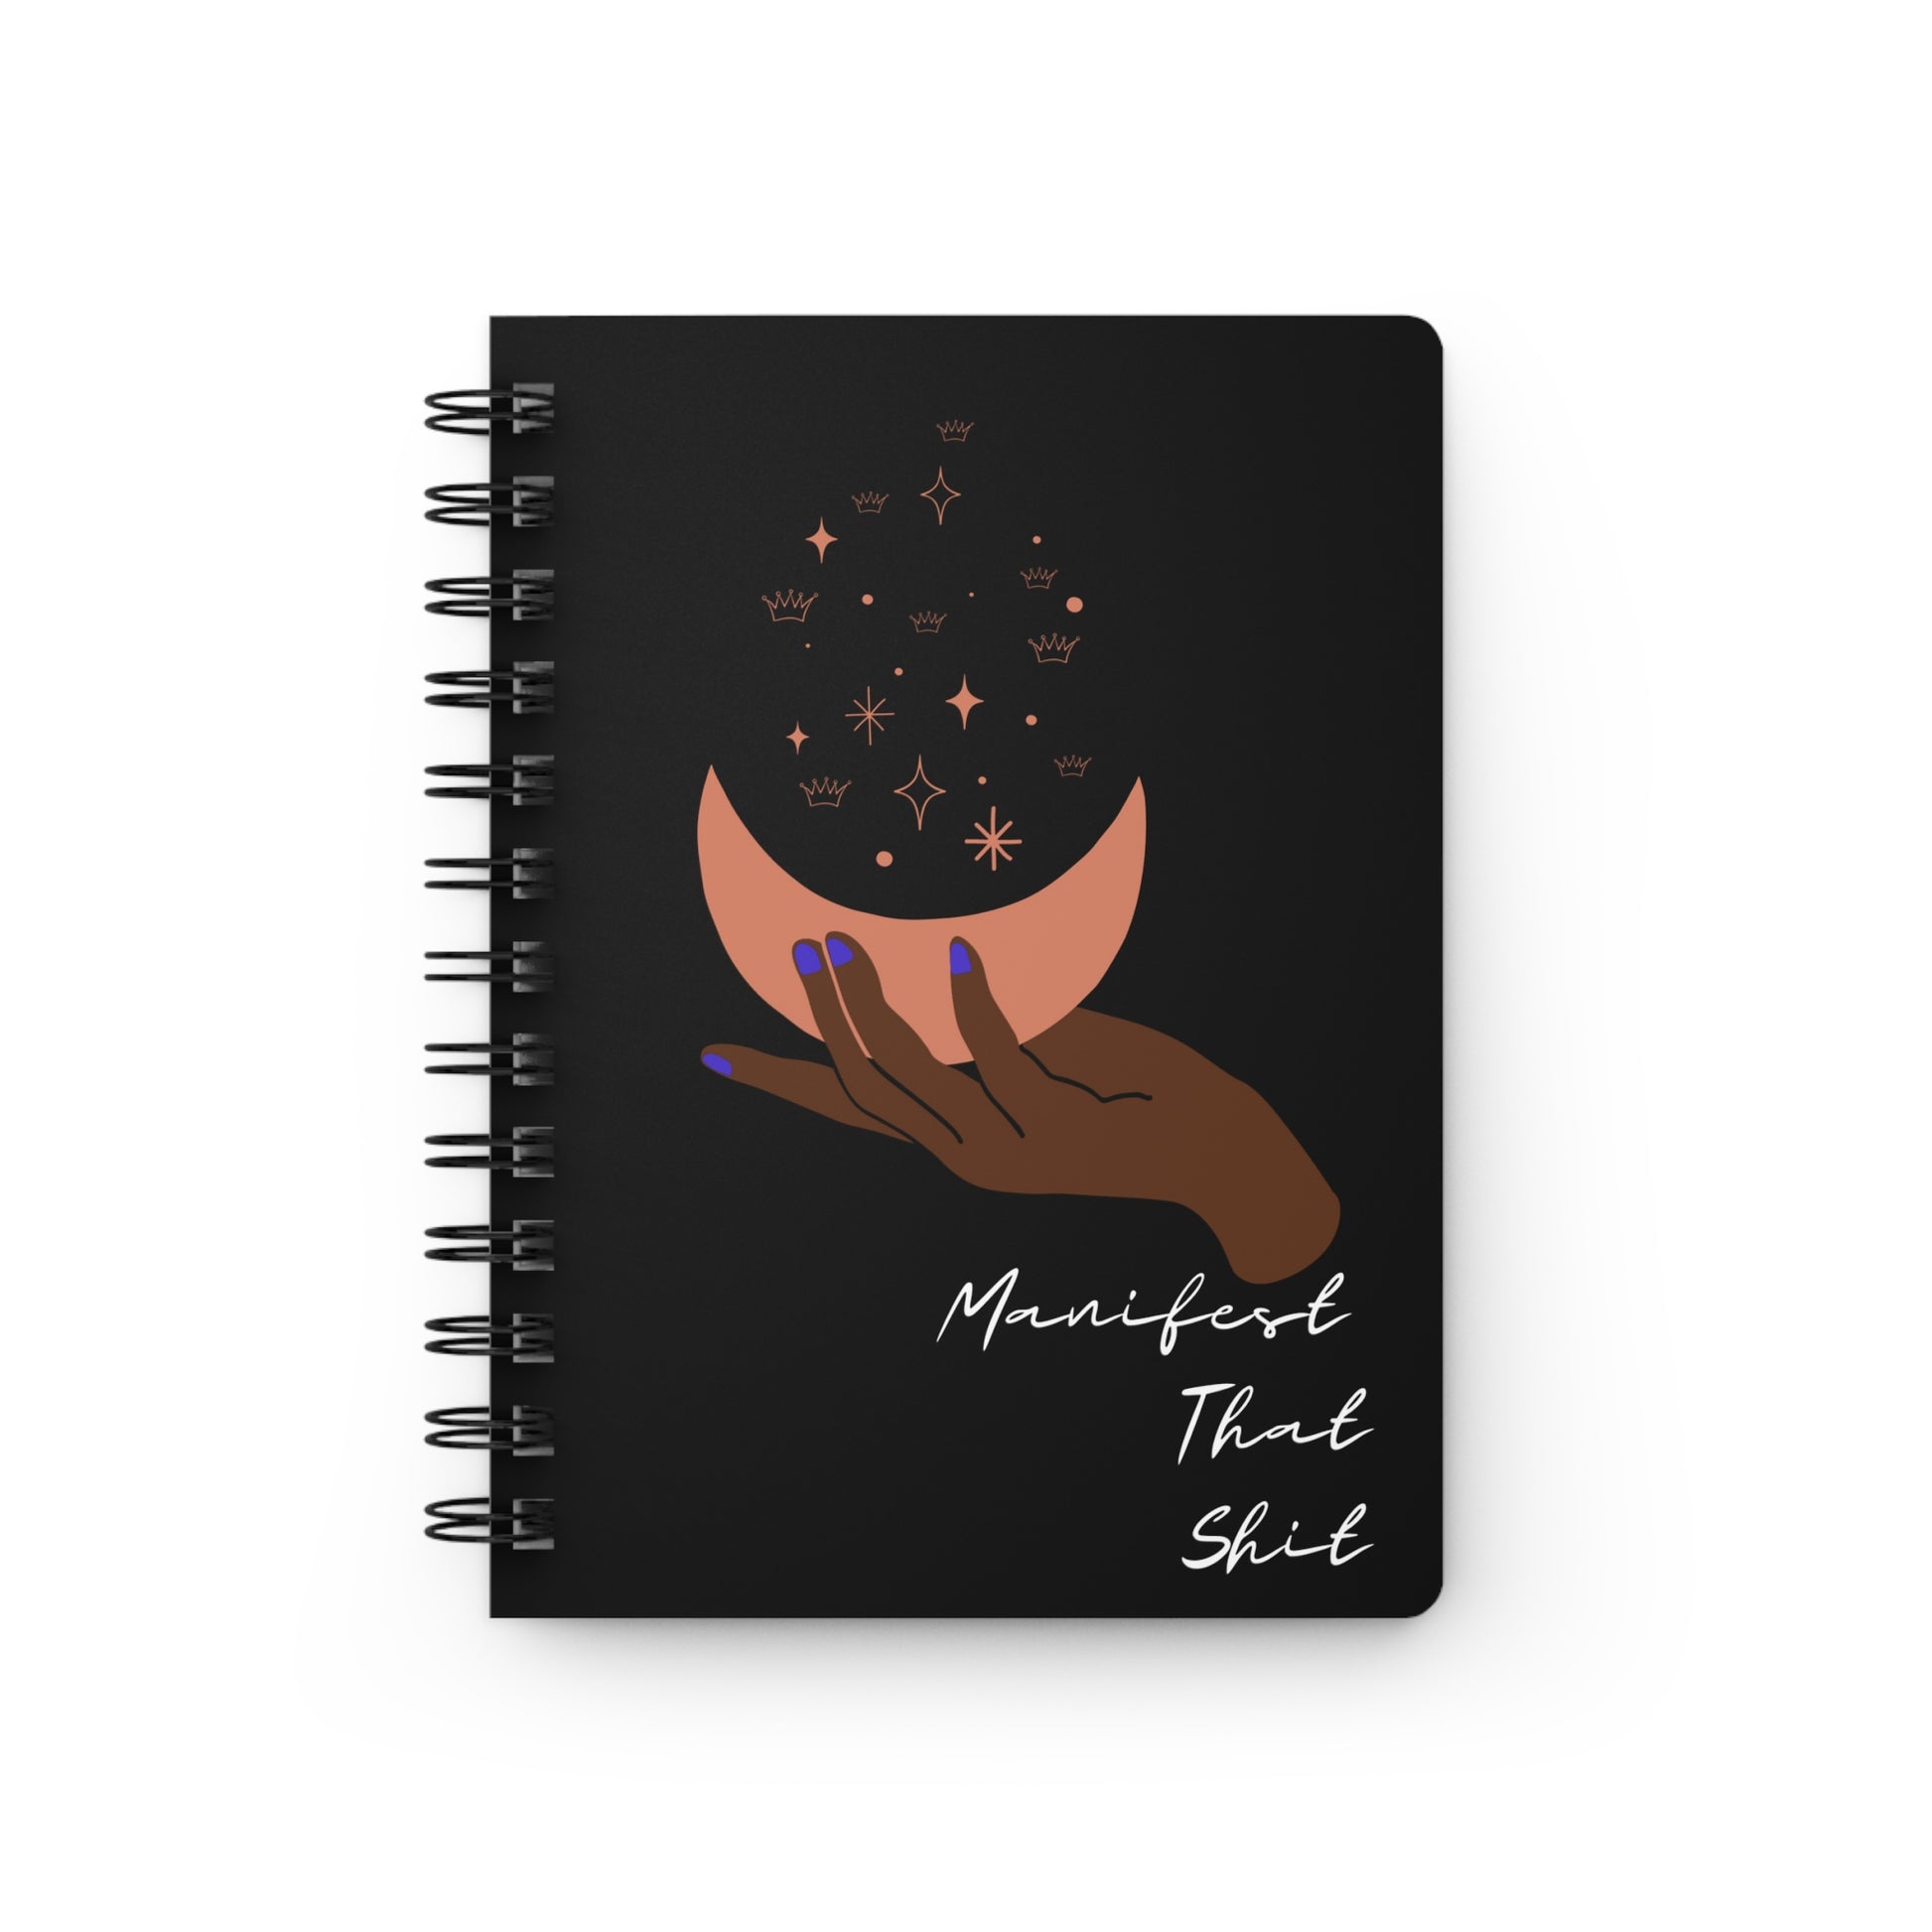 A "Manifest That Shit" manifesting journal adorned with a captivating black spiral notebook design featuring a hand holding a crescent and stars, perfect for practicing the law of attraction and gratitude journaling.